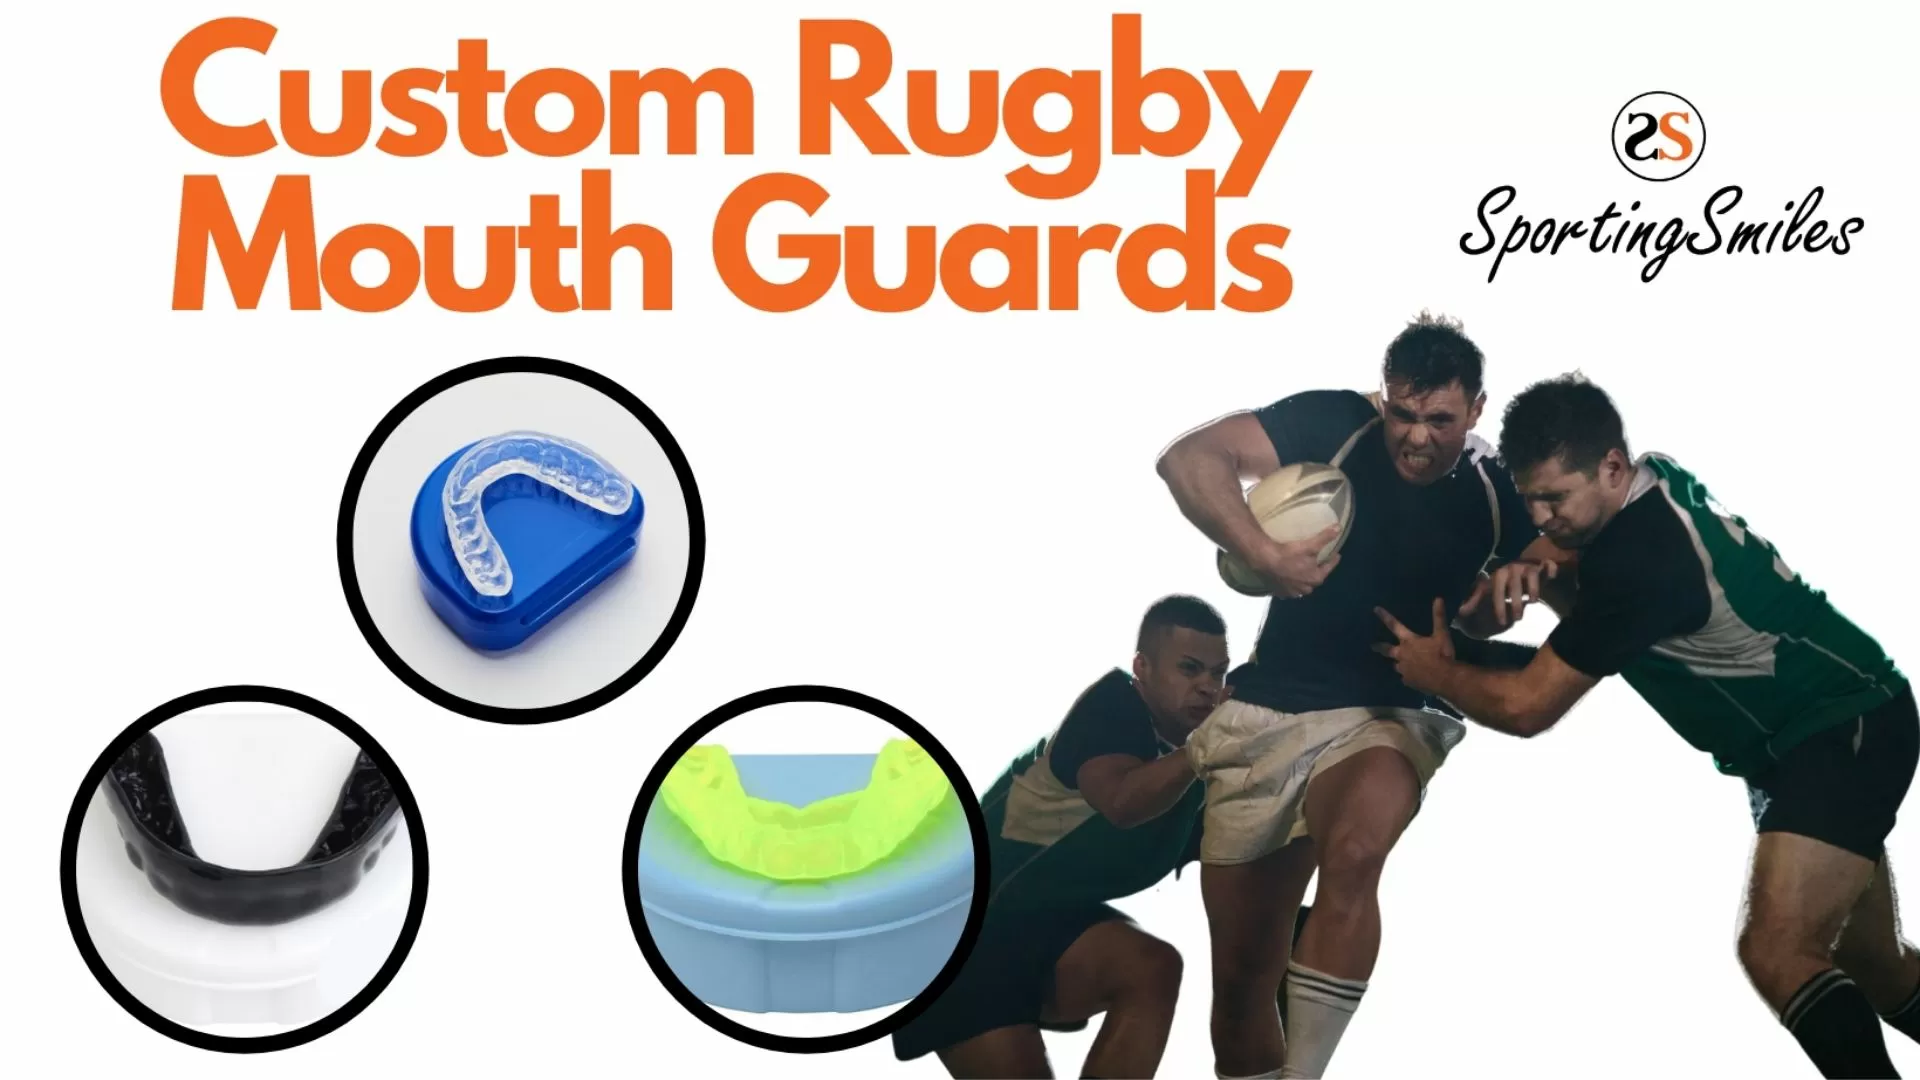 Custom Rugby Mouth Guards